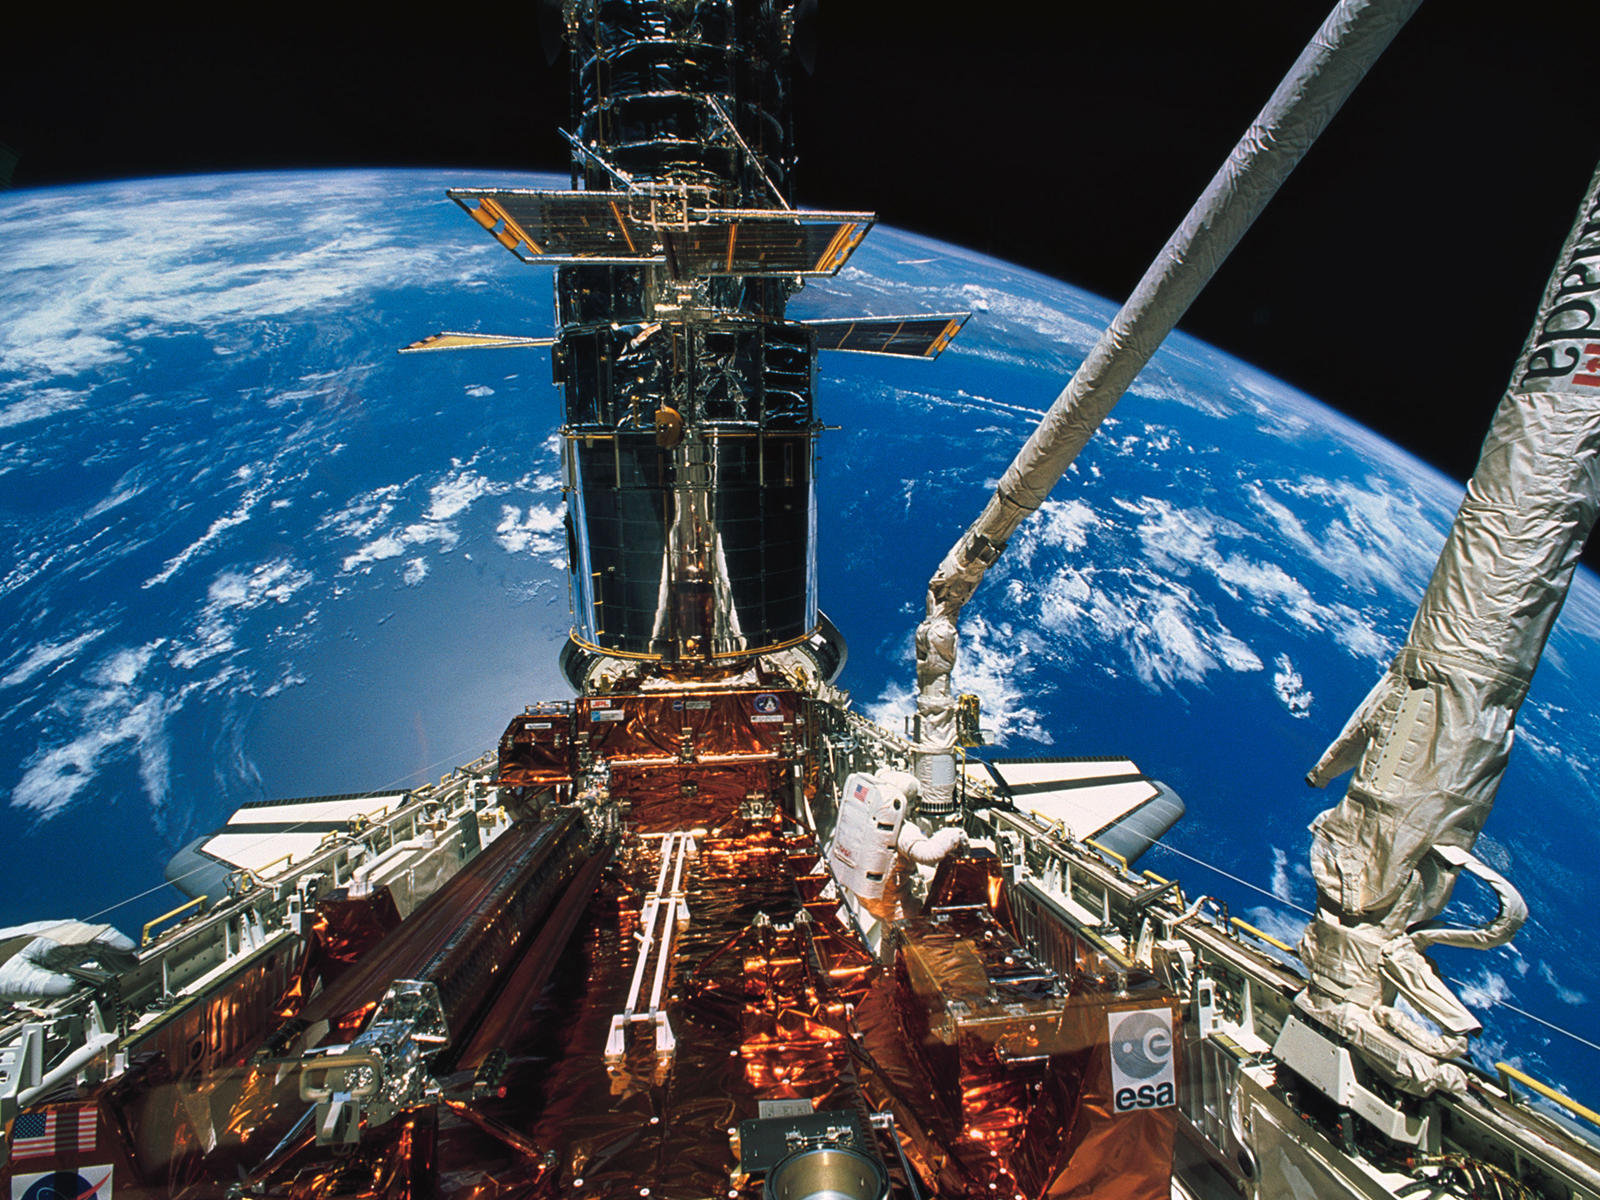 PHOTO: Astronaut F. Story Musgrave moves about in the Space Shuttle Endeavour's cargo bay during the deployment of the solar array panels on the Hubble Space Telescope (HST) during the final of five STS-61 space walks. The left hand of astronaut Jeffrey A. Hoffman appears at lower left corner. Photo courtesy of NASA.